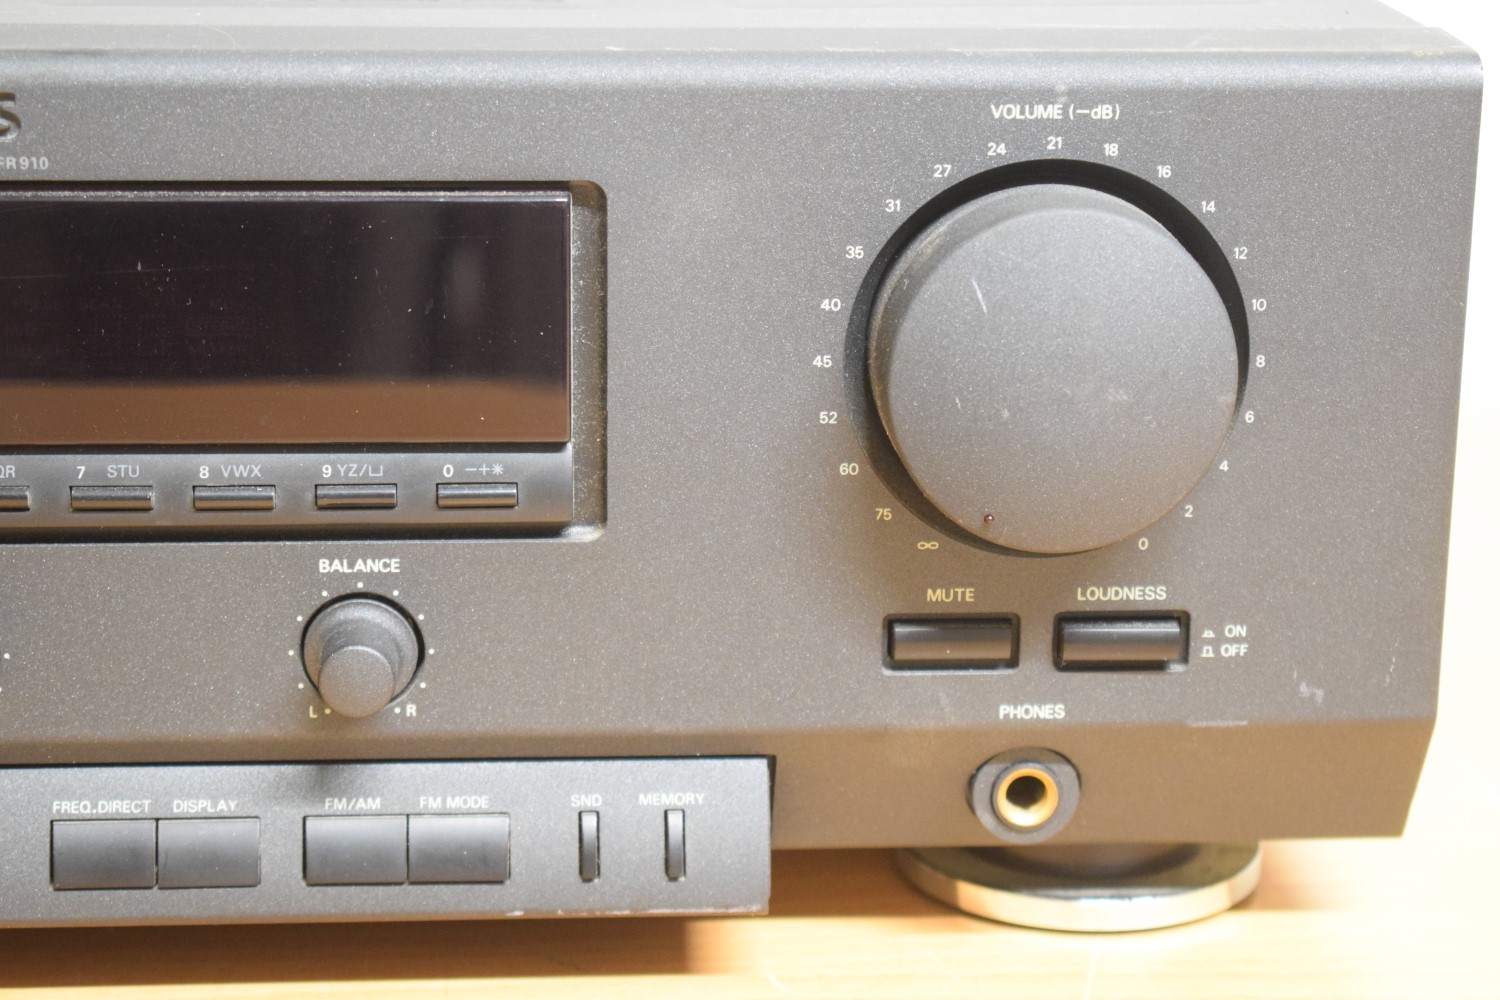 Philips 70FR910 Receiver